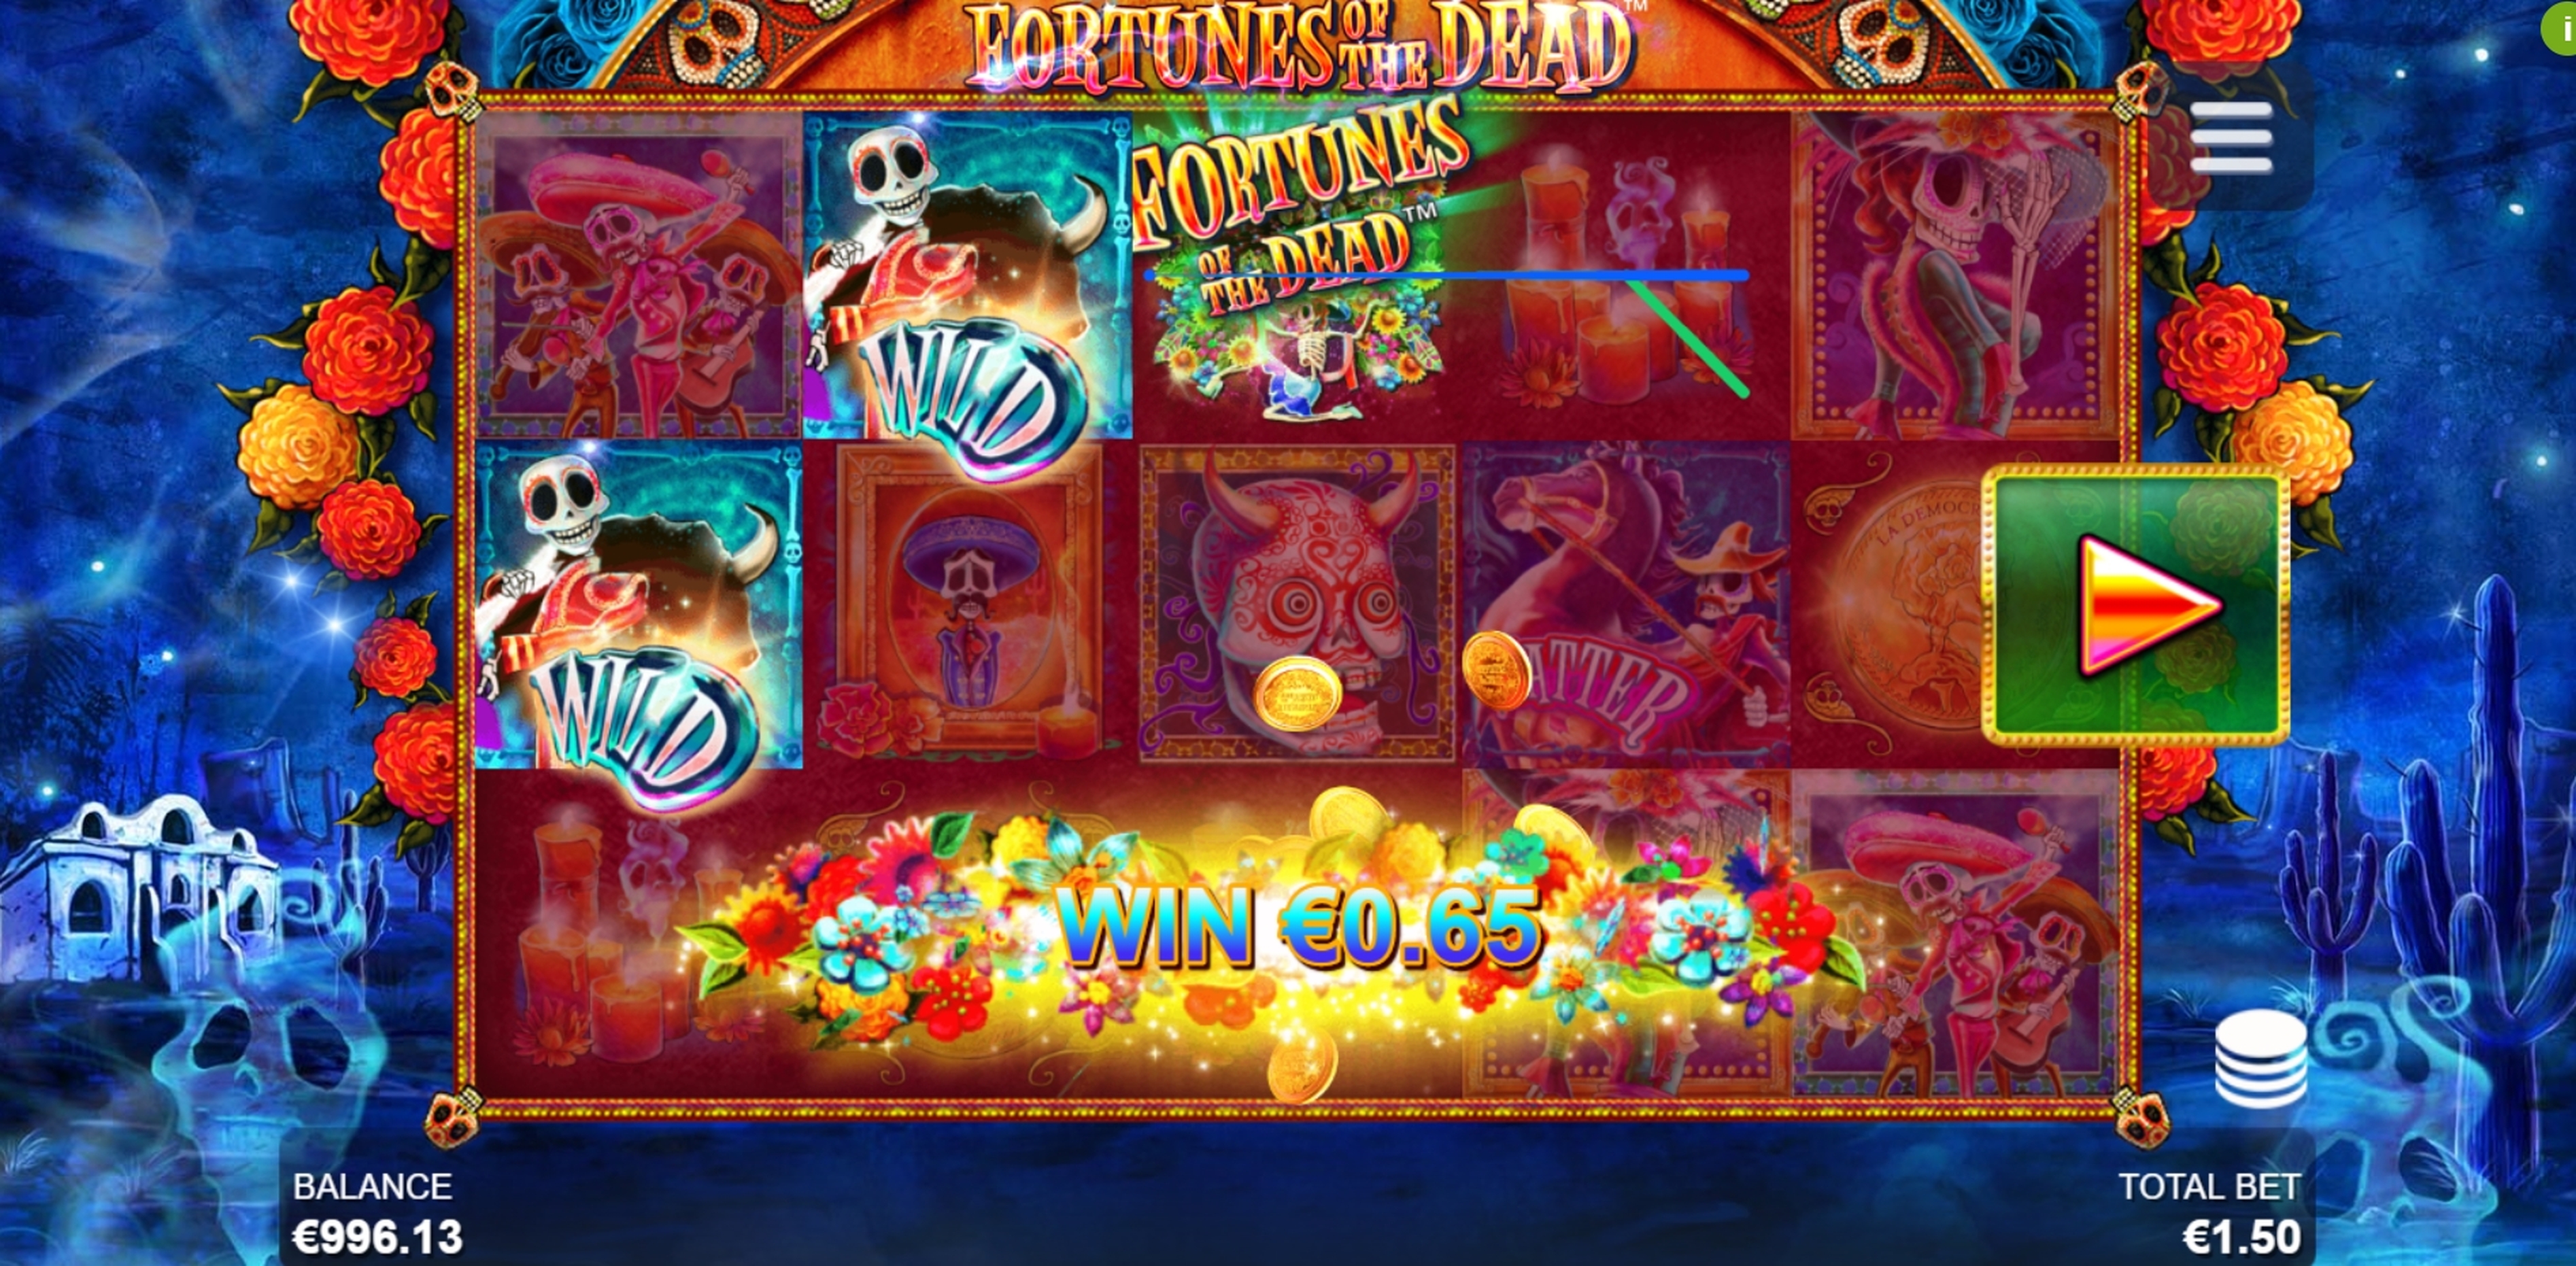 Win Money in Fortunes of the Dead Free Slot Game by Side City Studios